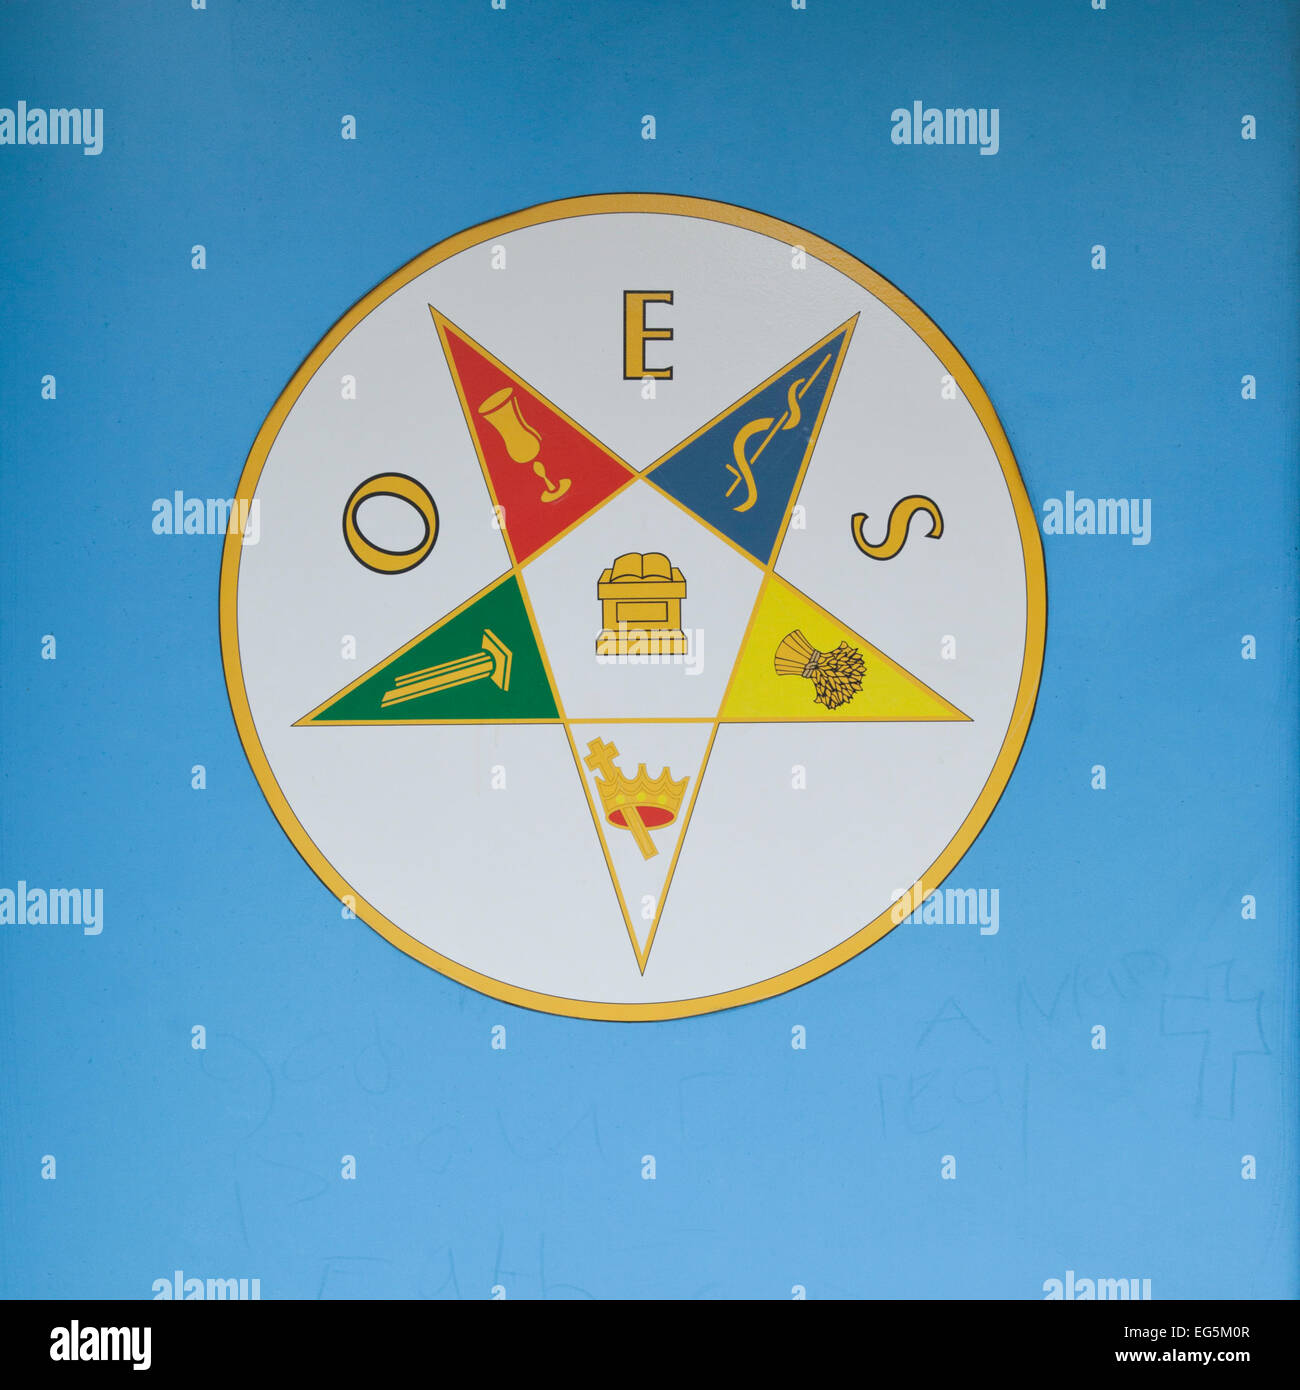 Masonic Sign Of The Order Of The Eastern Star On The Prince Hall Stock